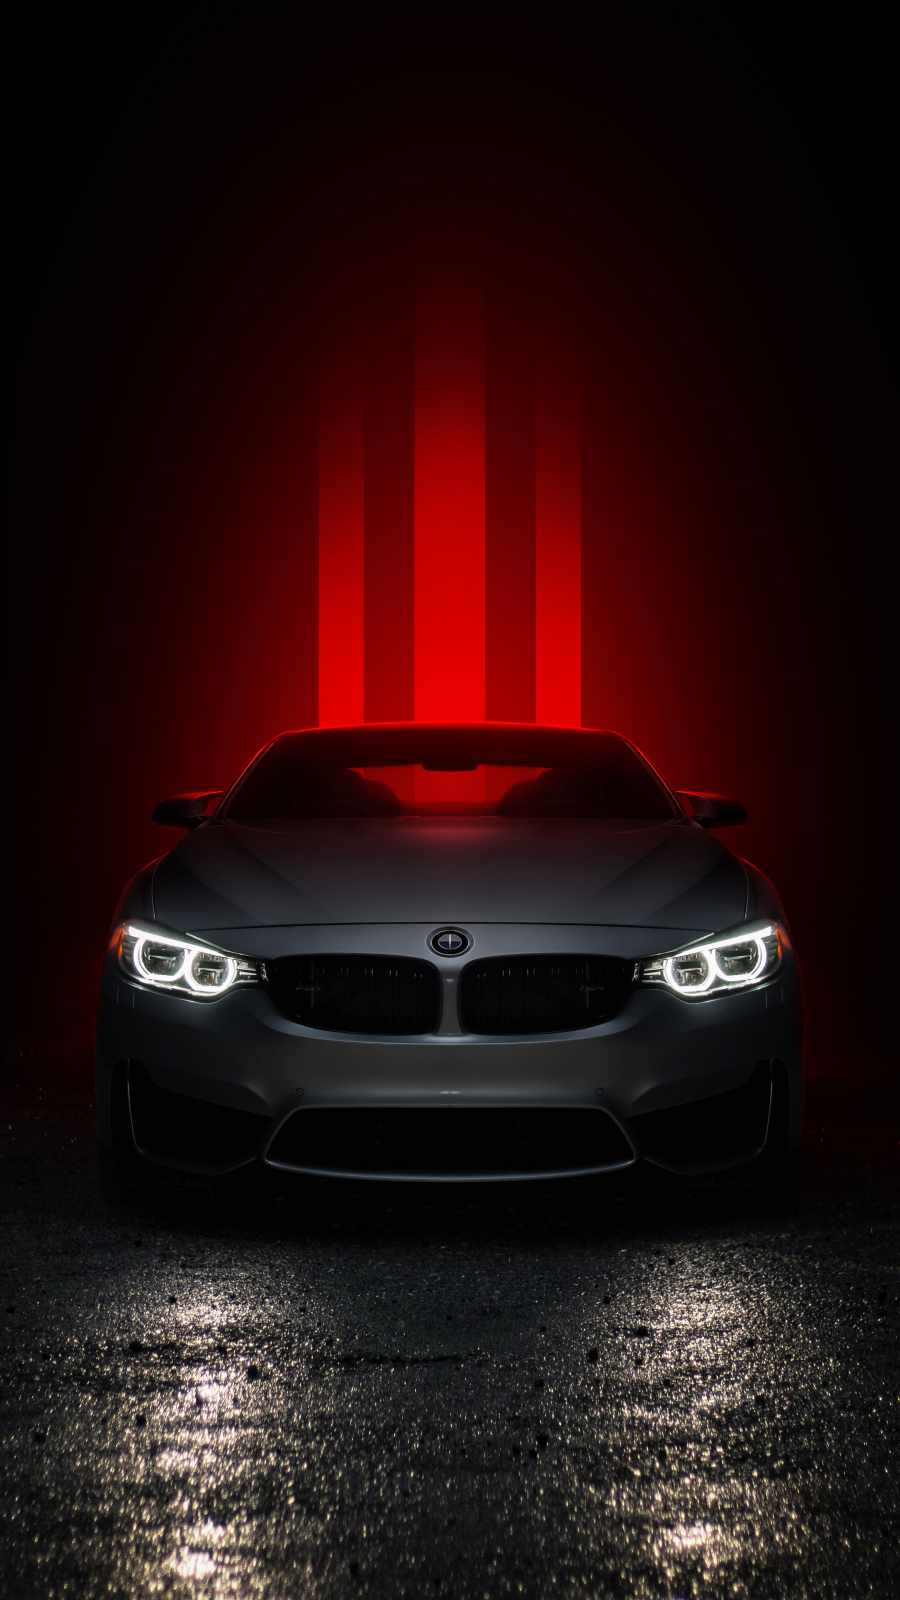 BMW Car Lights IPhone Wallpaper - IPhone Wallpapers : iPhone Wallpapers